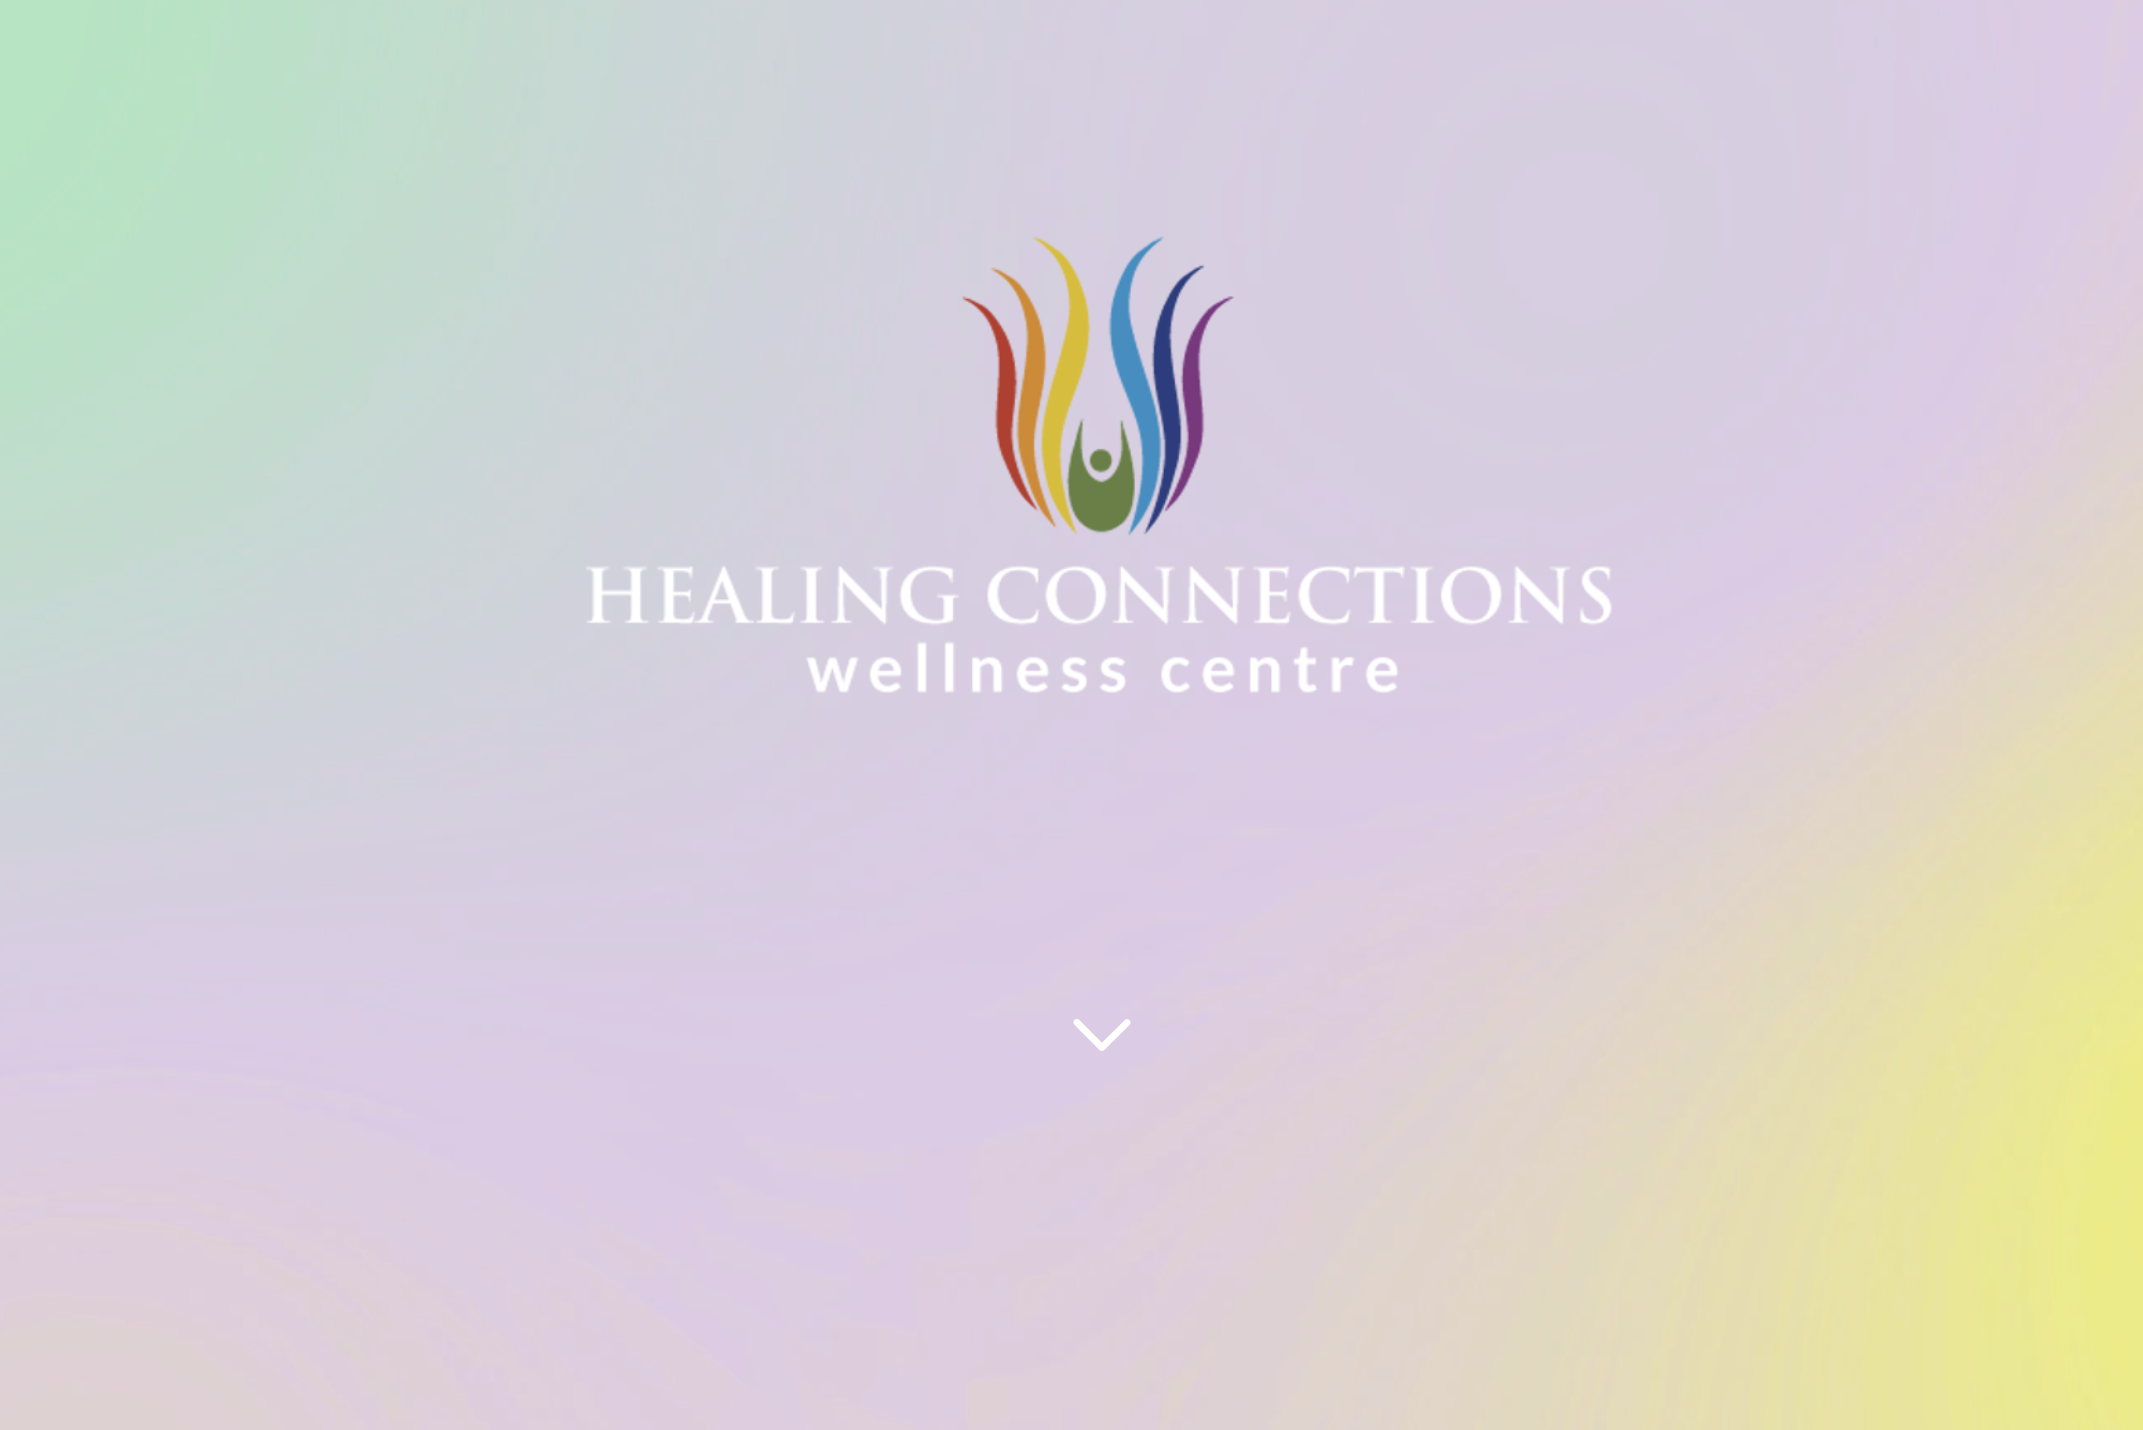 HEALING CONNECTIONS